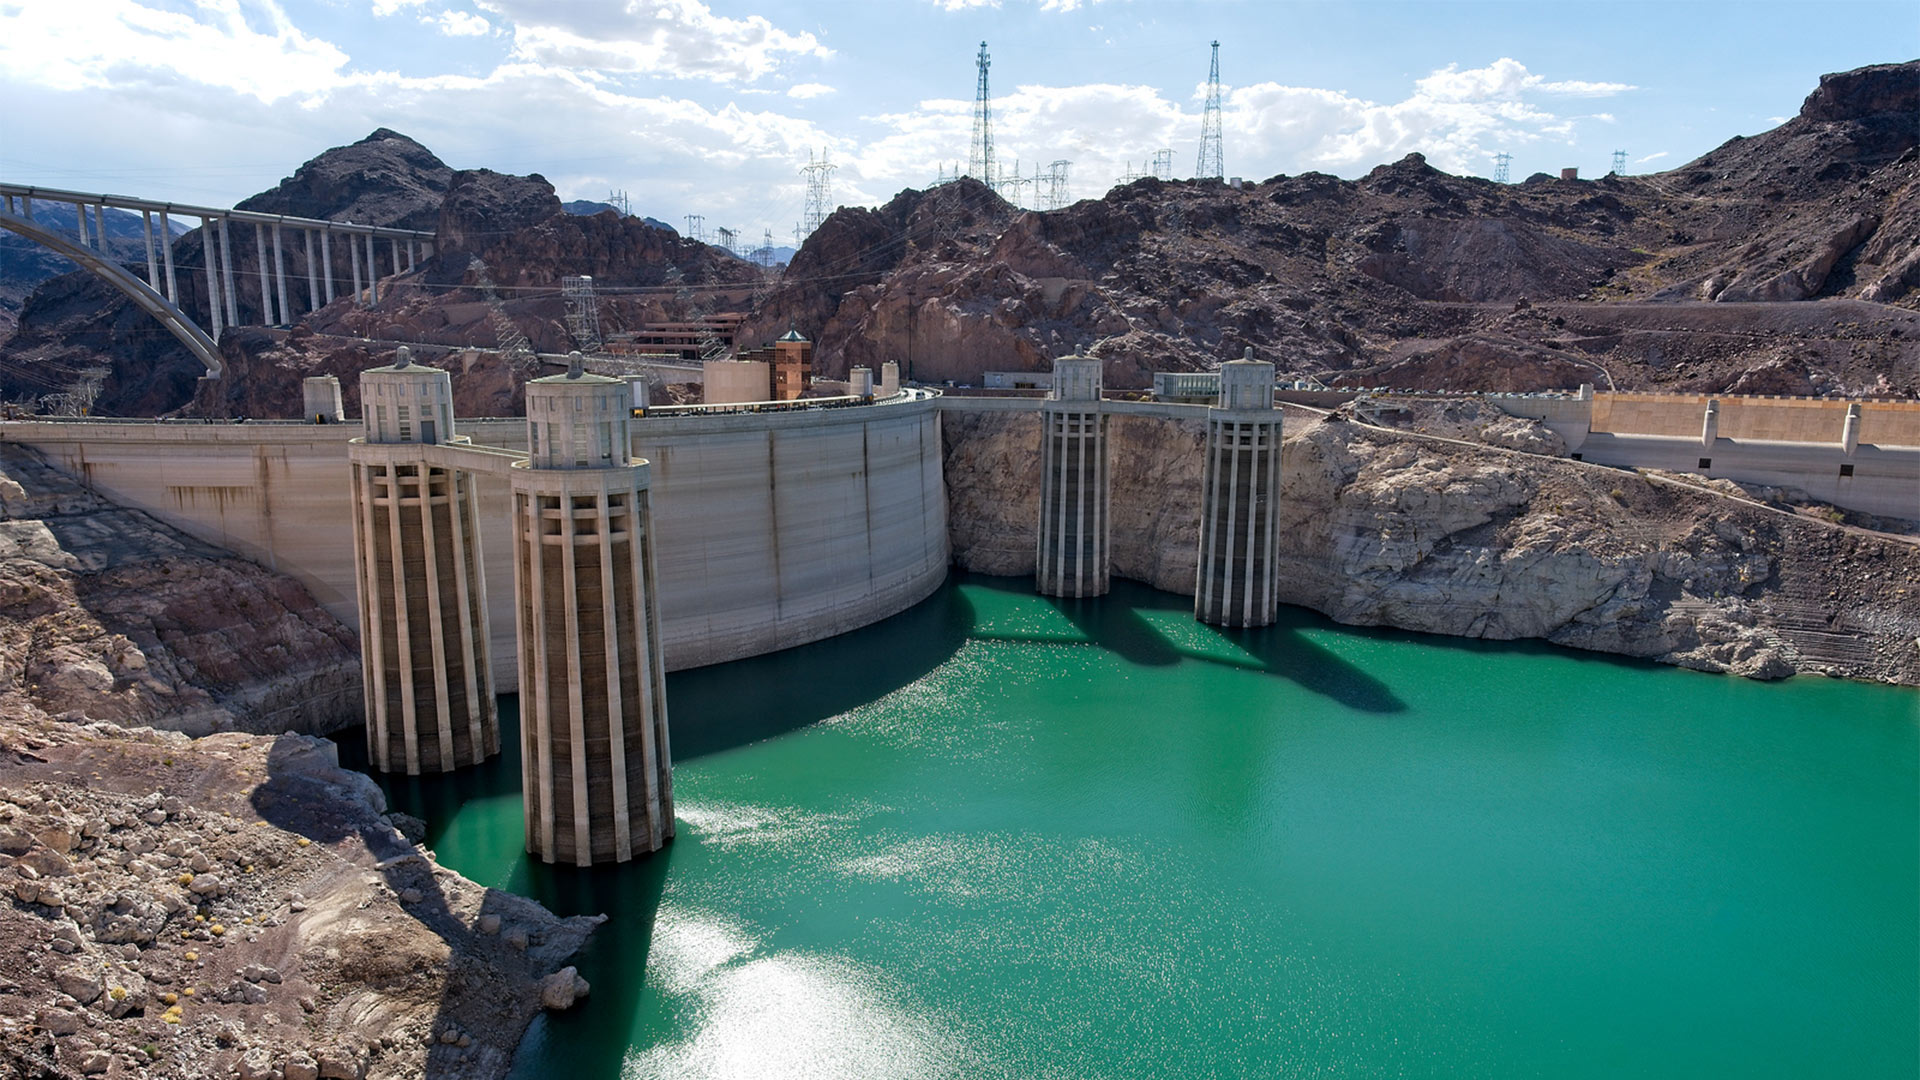 The seven states in the Colorado River basin couldn't agree on a plan to conserve unprecedented amounts of water before a federal deadline. Meanwhile, grim projections for the future of water levels in Lake Mead have forced mandatory cuts to water for some users in the lower basin. Federal authorities are trying to prop up levels in the nation's largest reservoir before they dip too low to generate hydropower or allow the passage of water.
